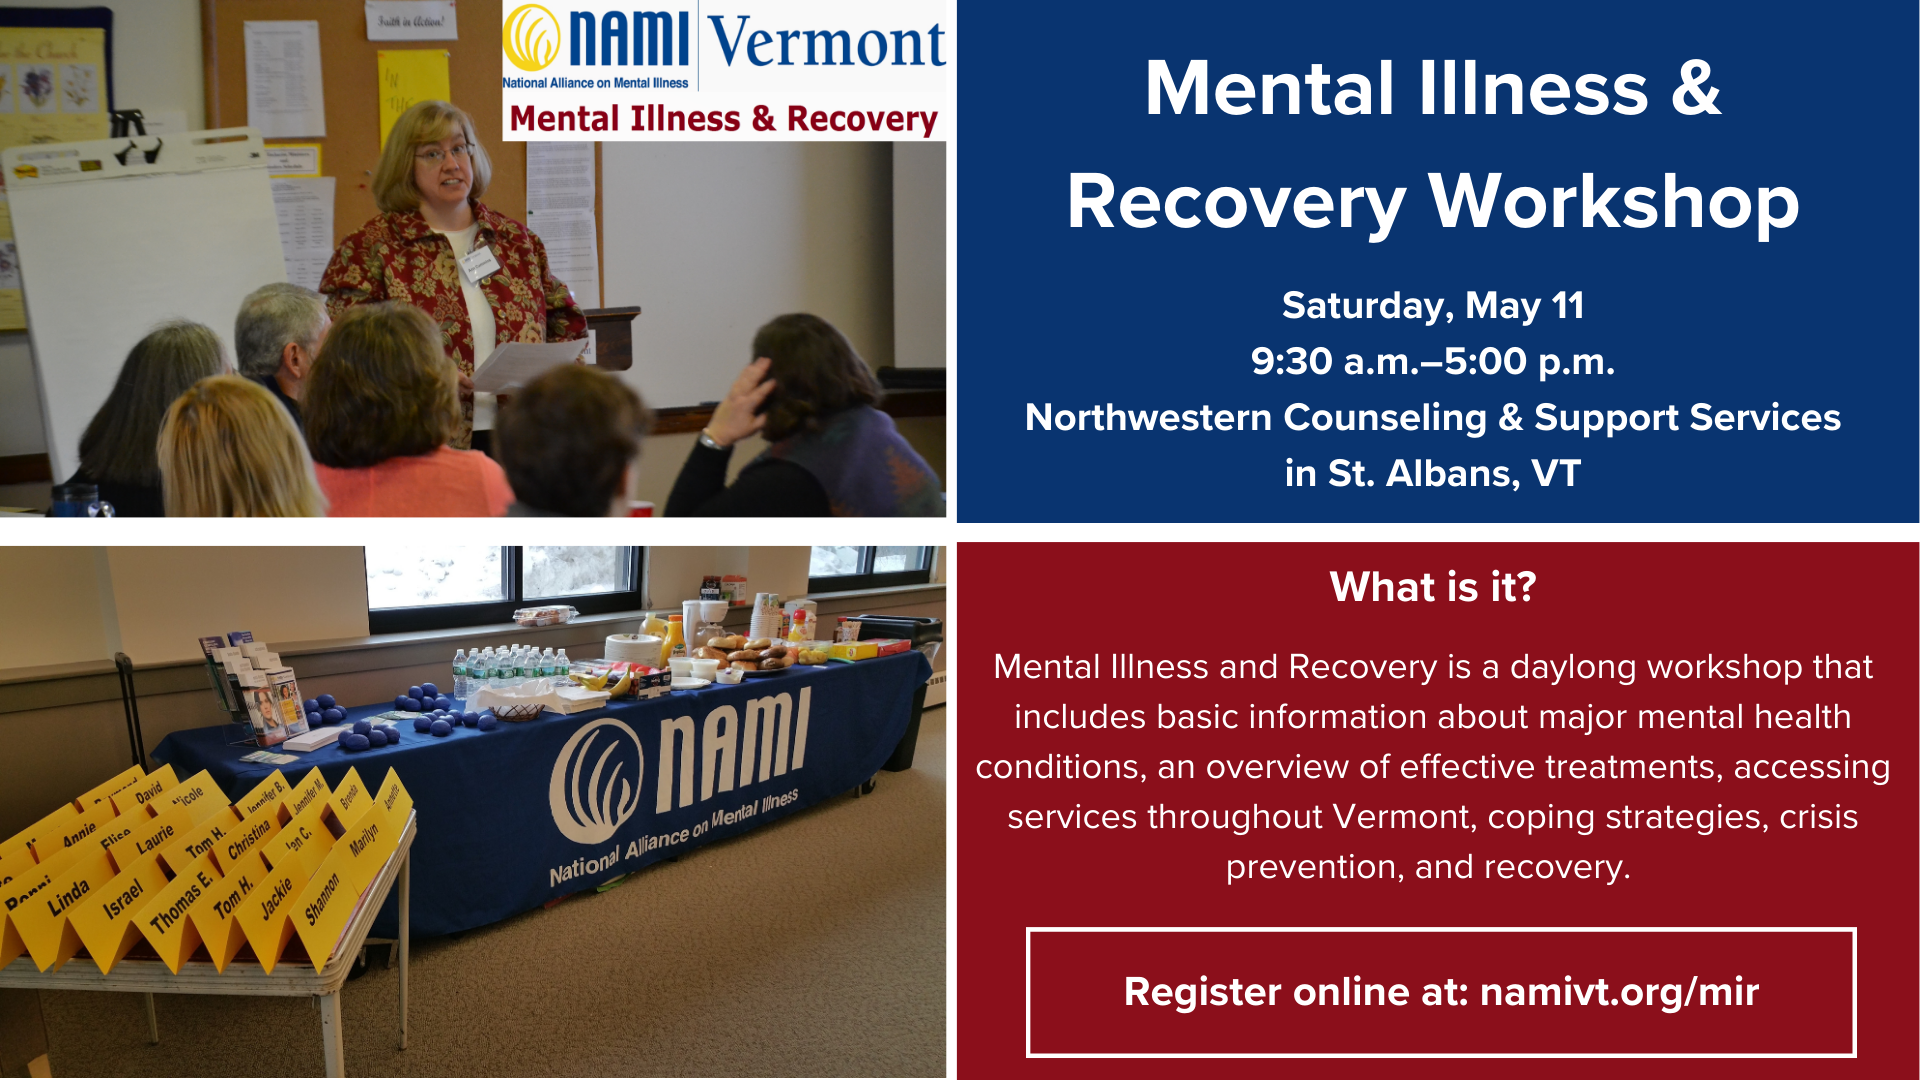 Mental Illness & Recovery event poster